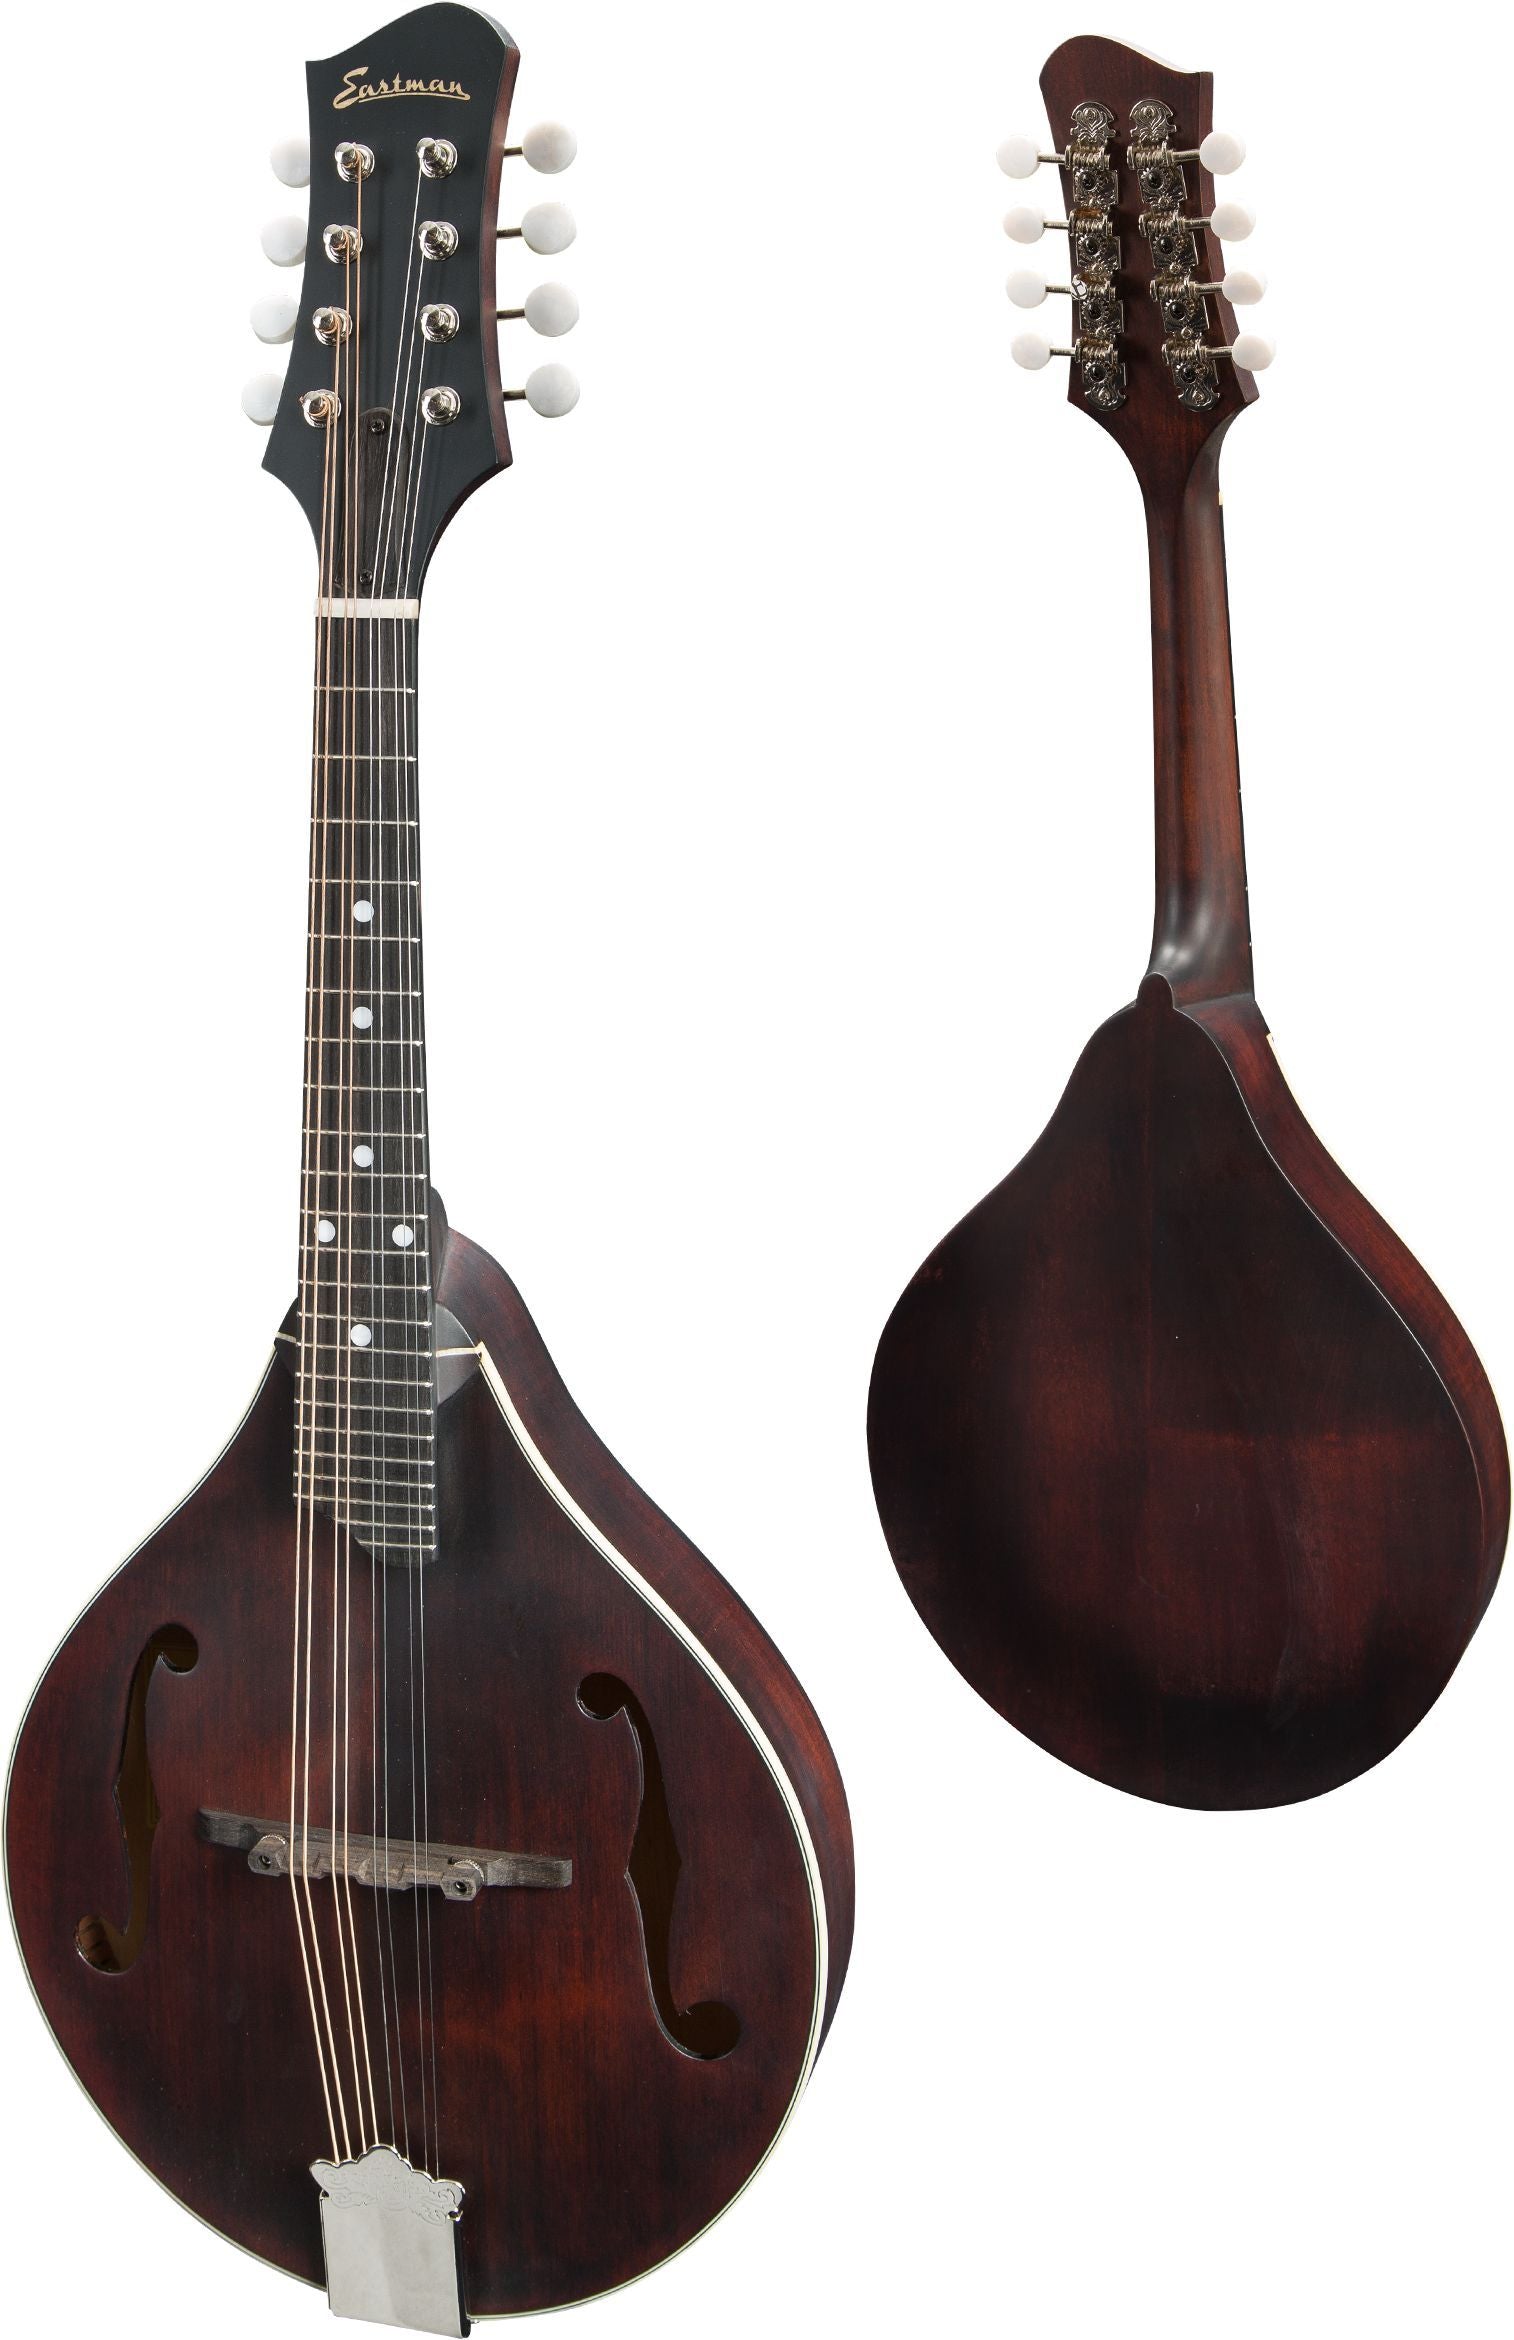 Eastman MD305 A-style Mandolin (F-holes, Solid Spruce top, Solid Maple back and sides, w/Gigbag) - EXCLISIVE Limited UK Price, Mandolin for sale at Richards Guitars.